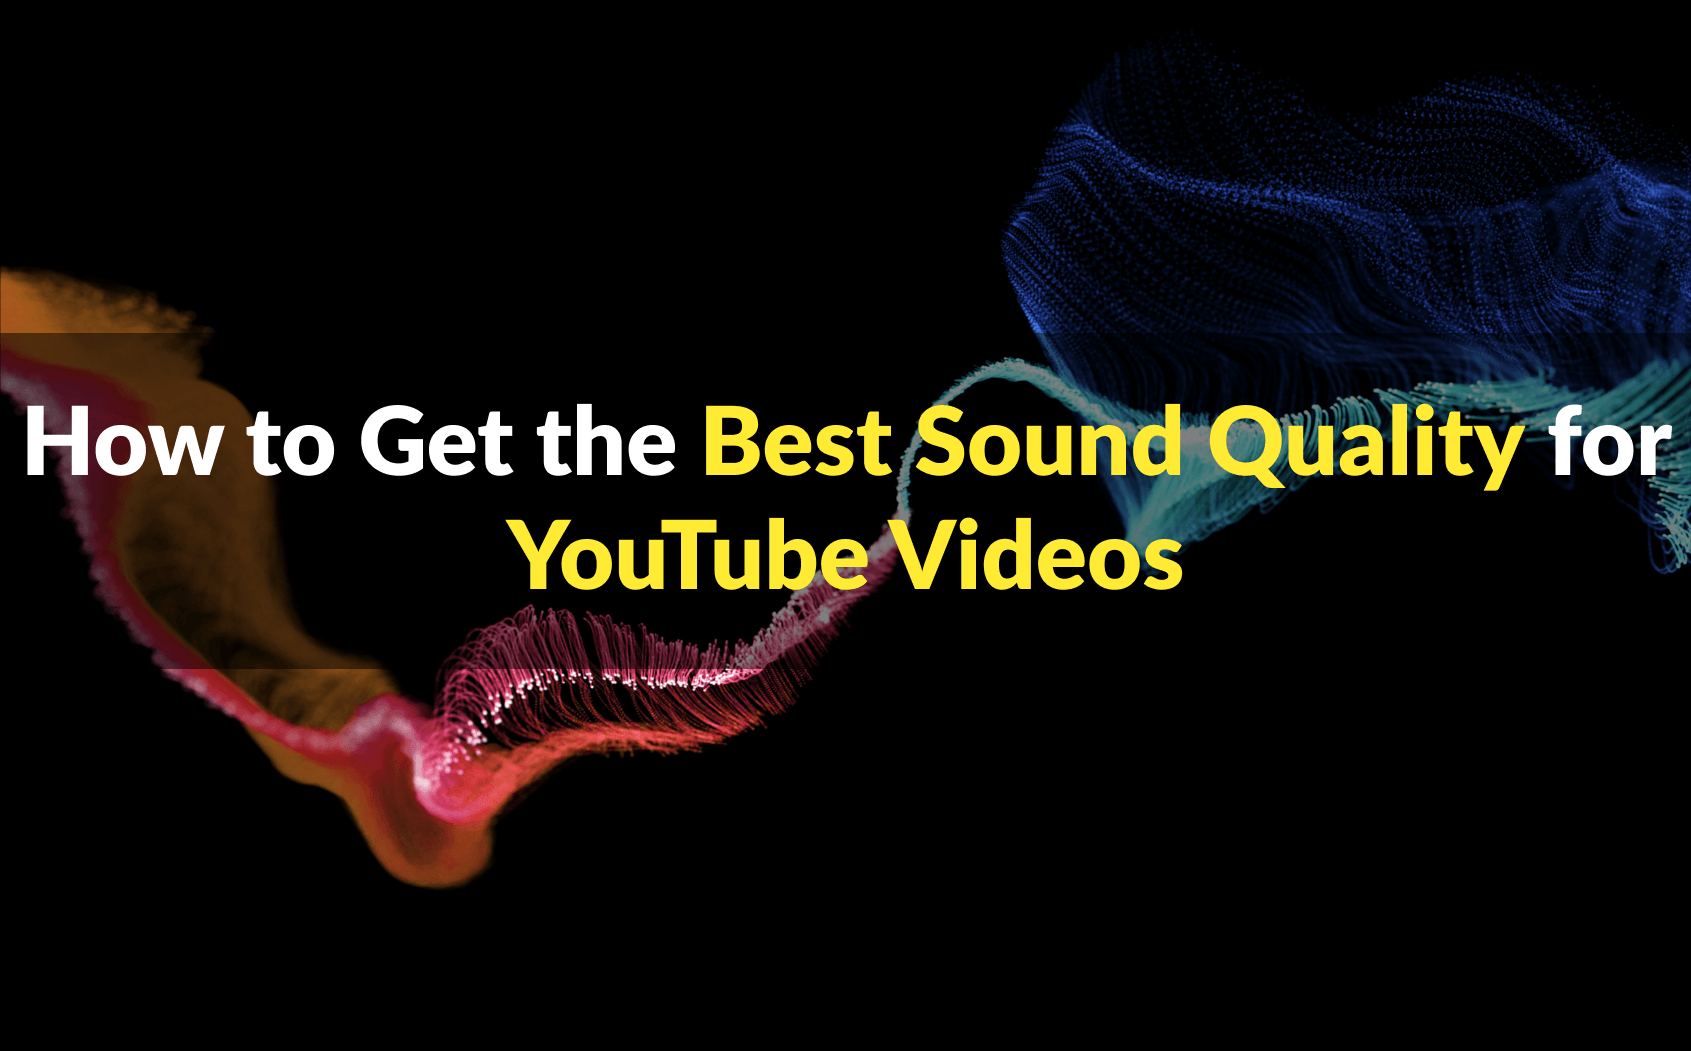 Best Sound Quality for YouTube Videos